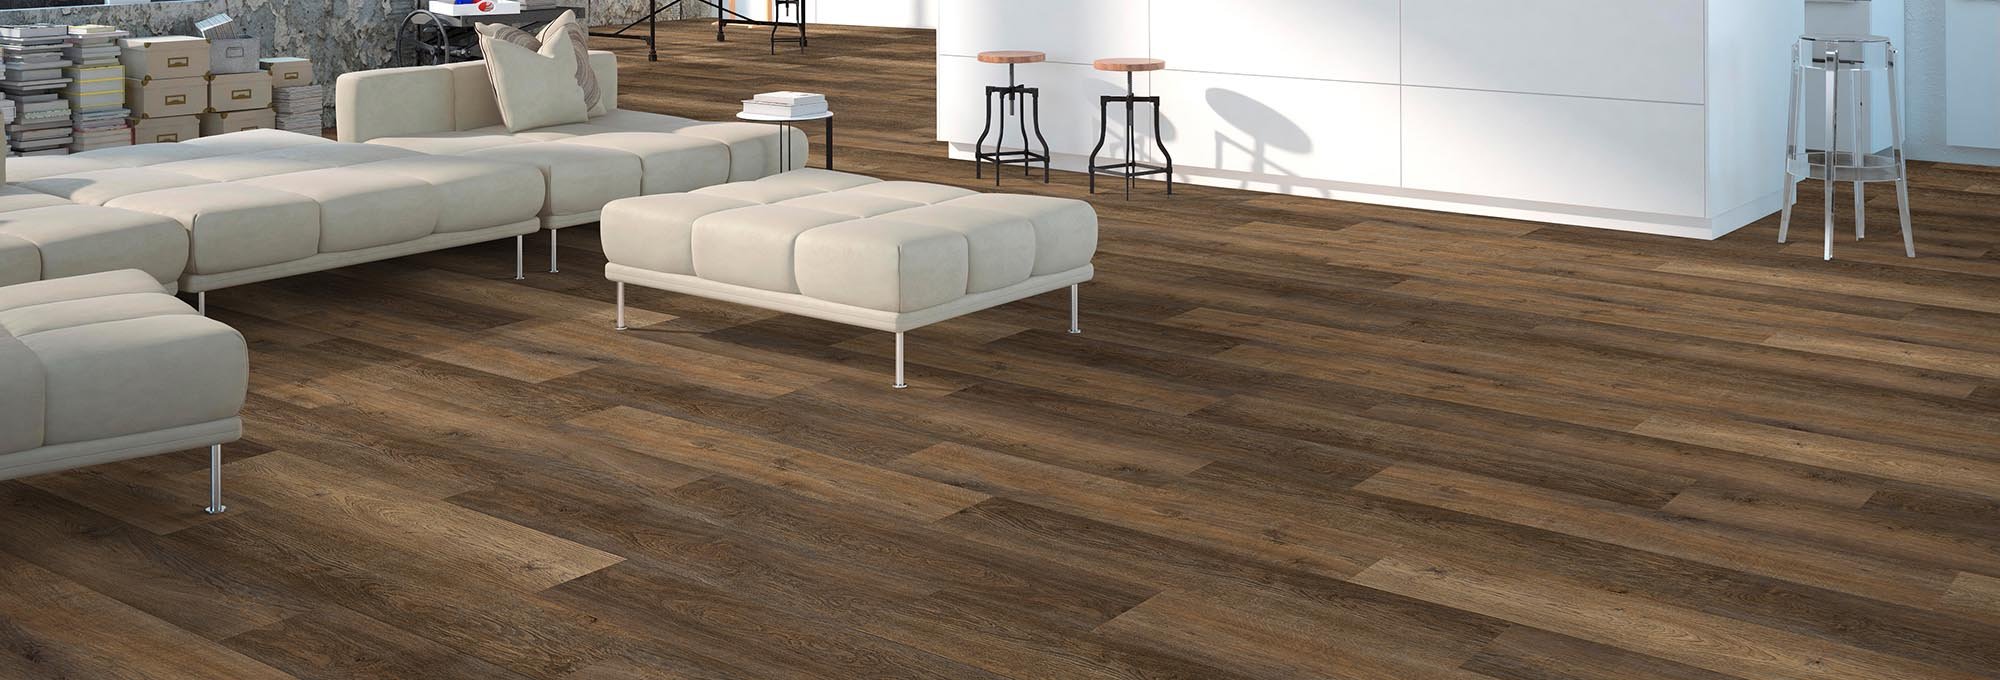 Shop Flooring Products from {{ name }} in {{ location }}